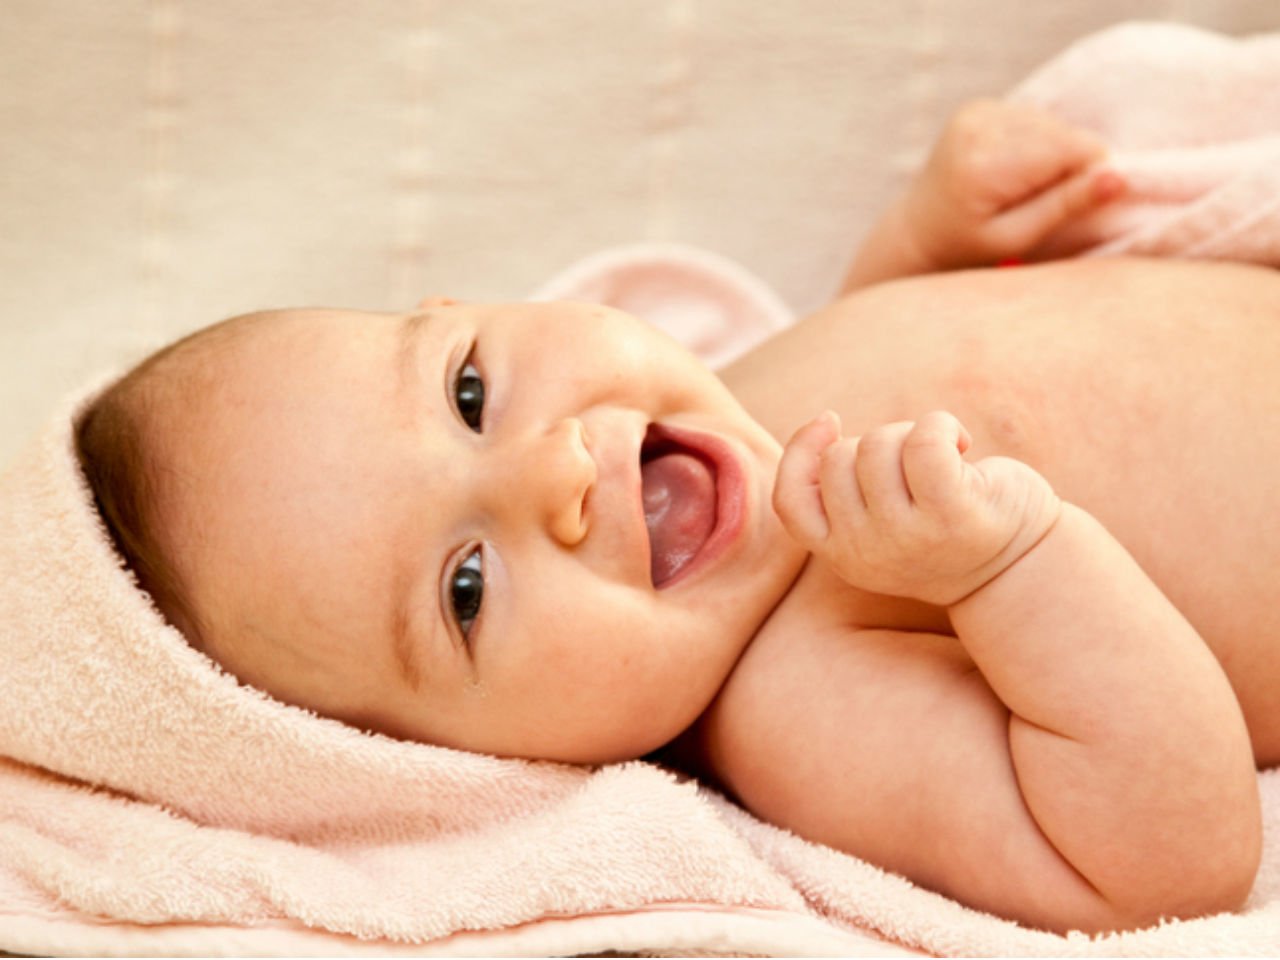 When do babies first smile?